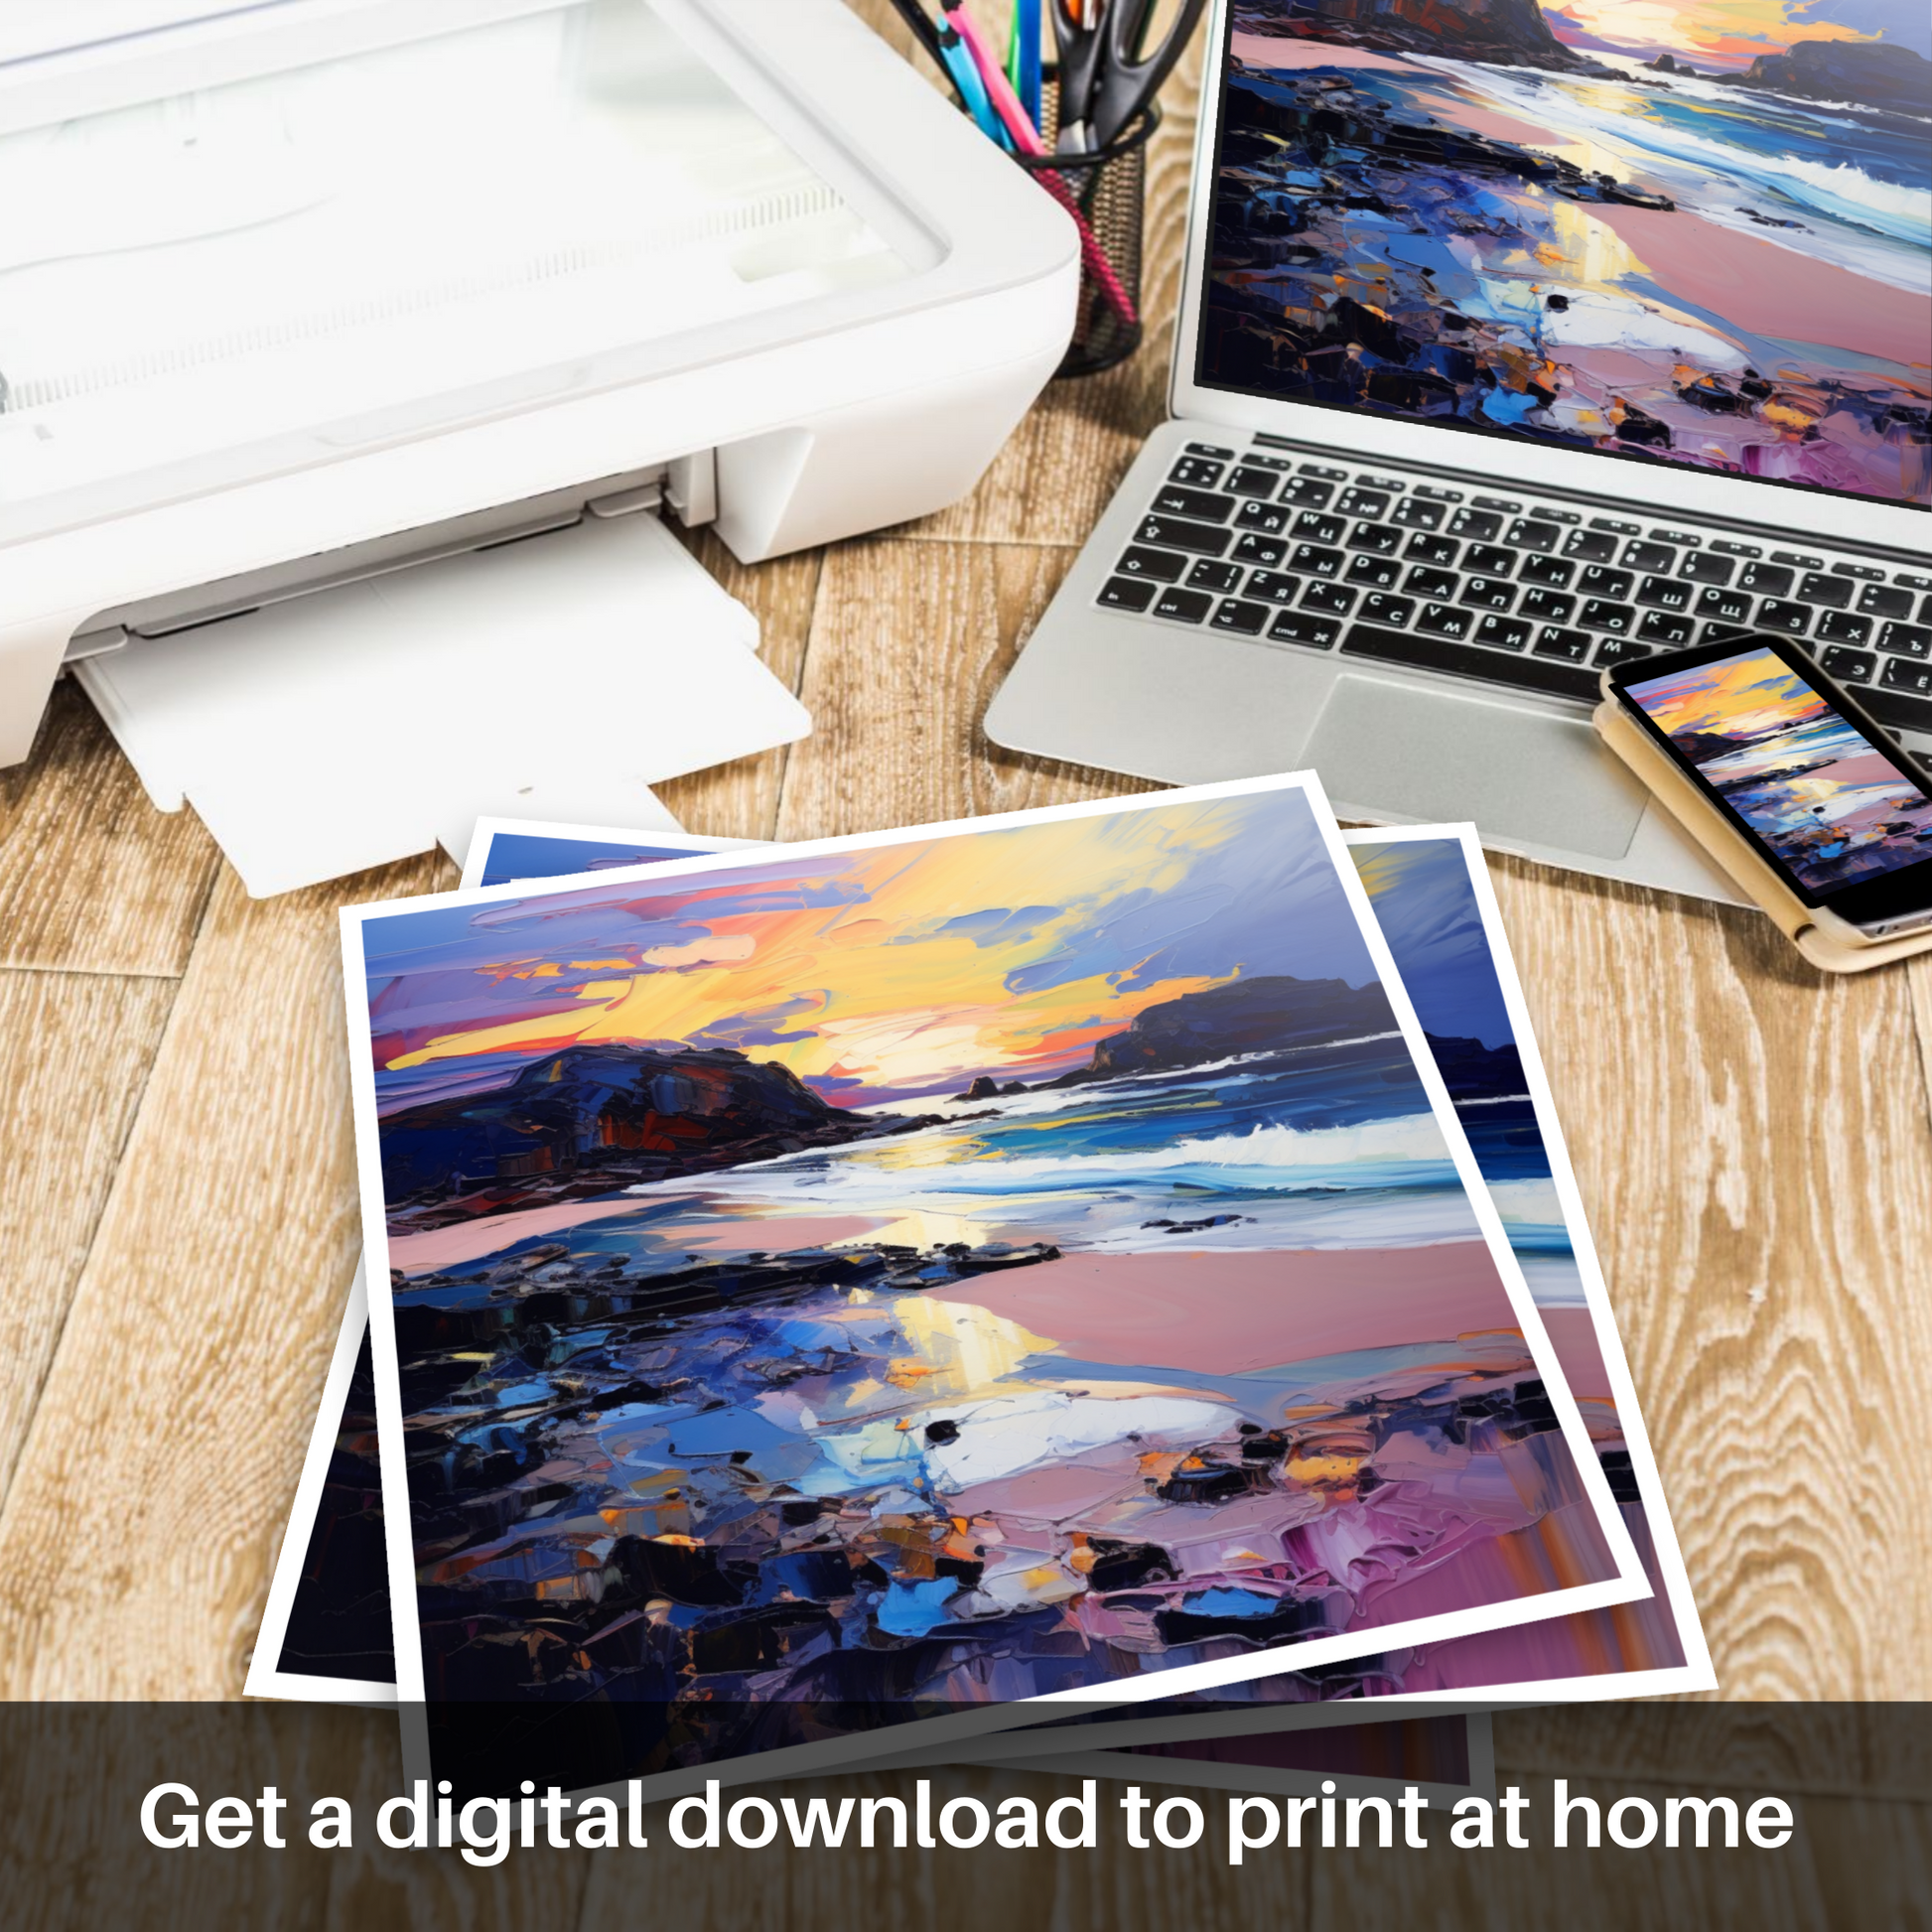 Downloadable and printable picture of Seilebost Beach at dusk